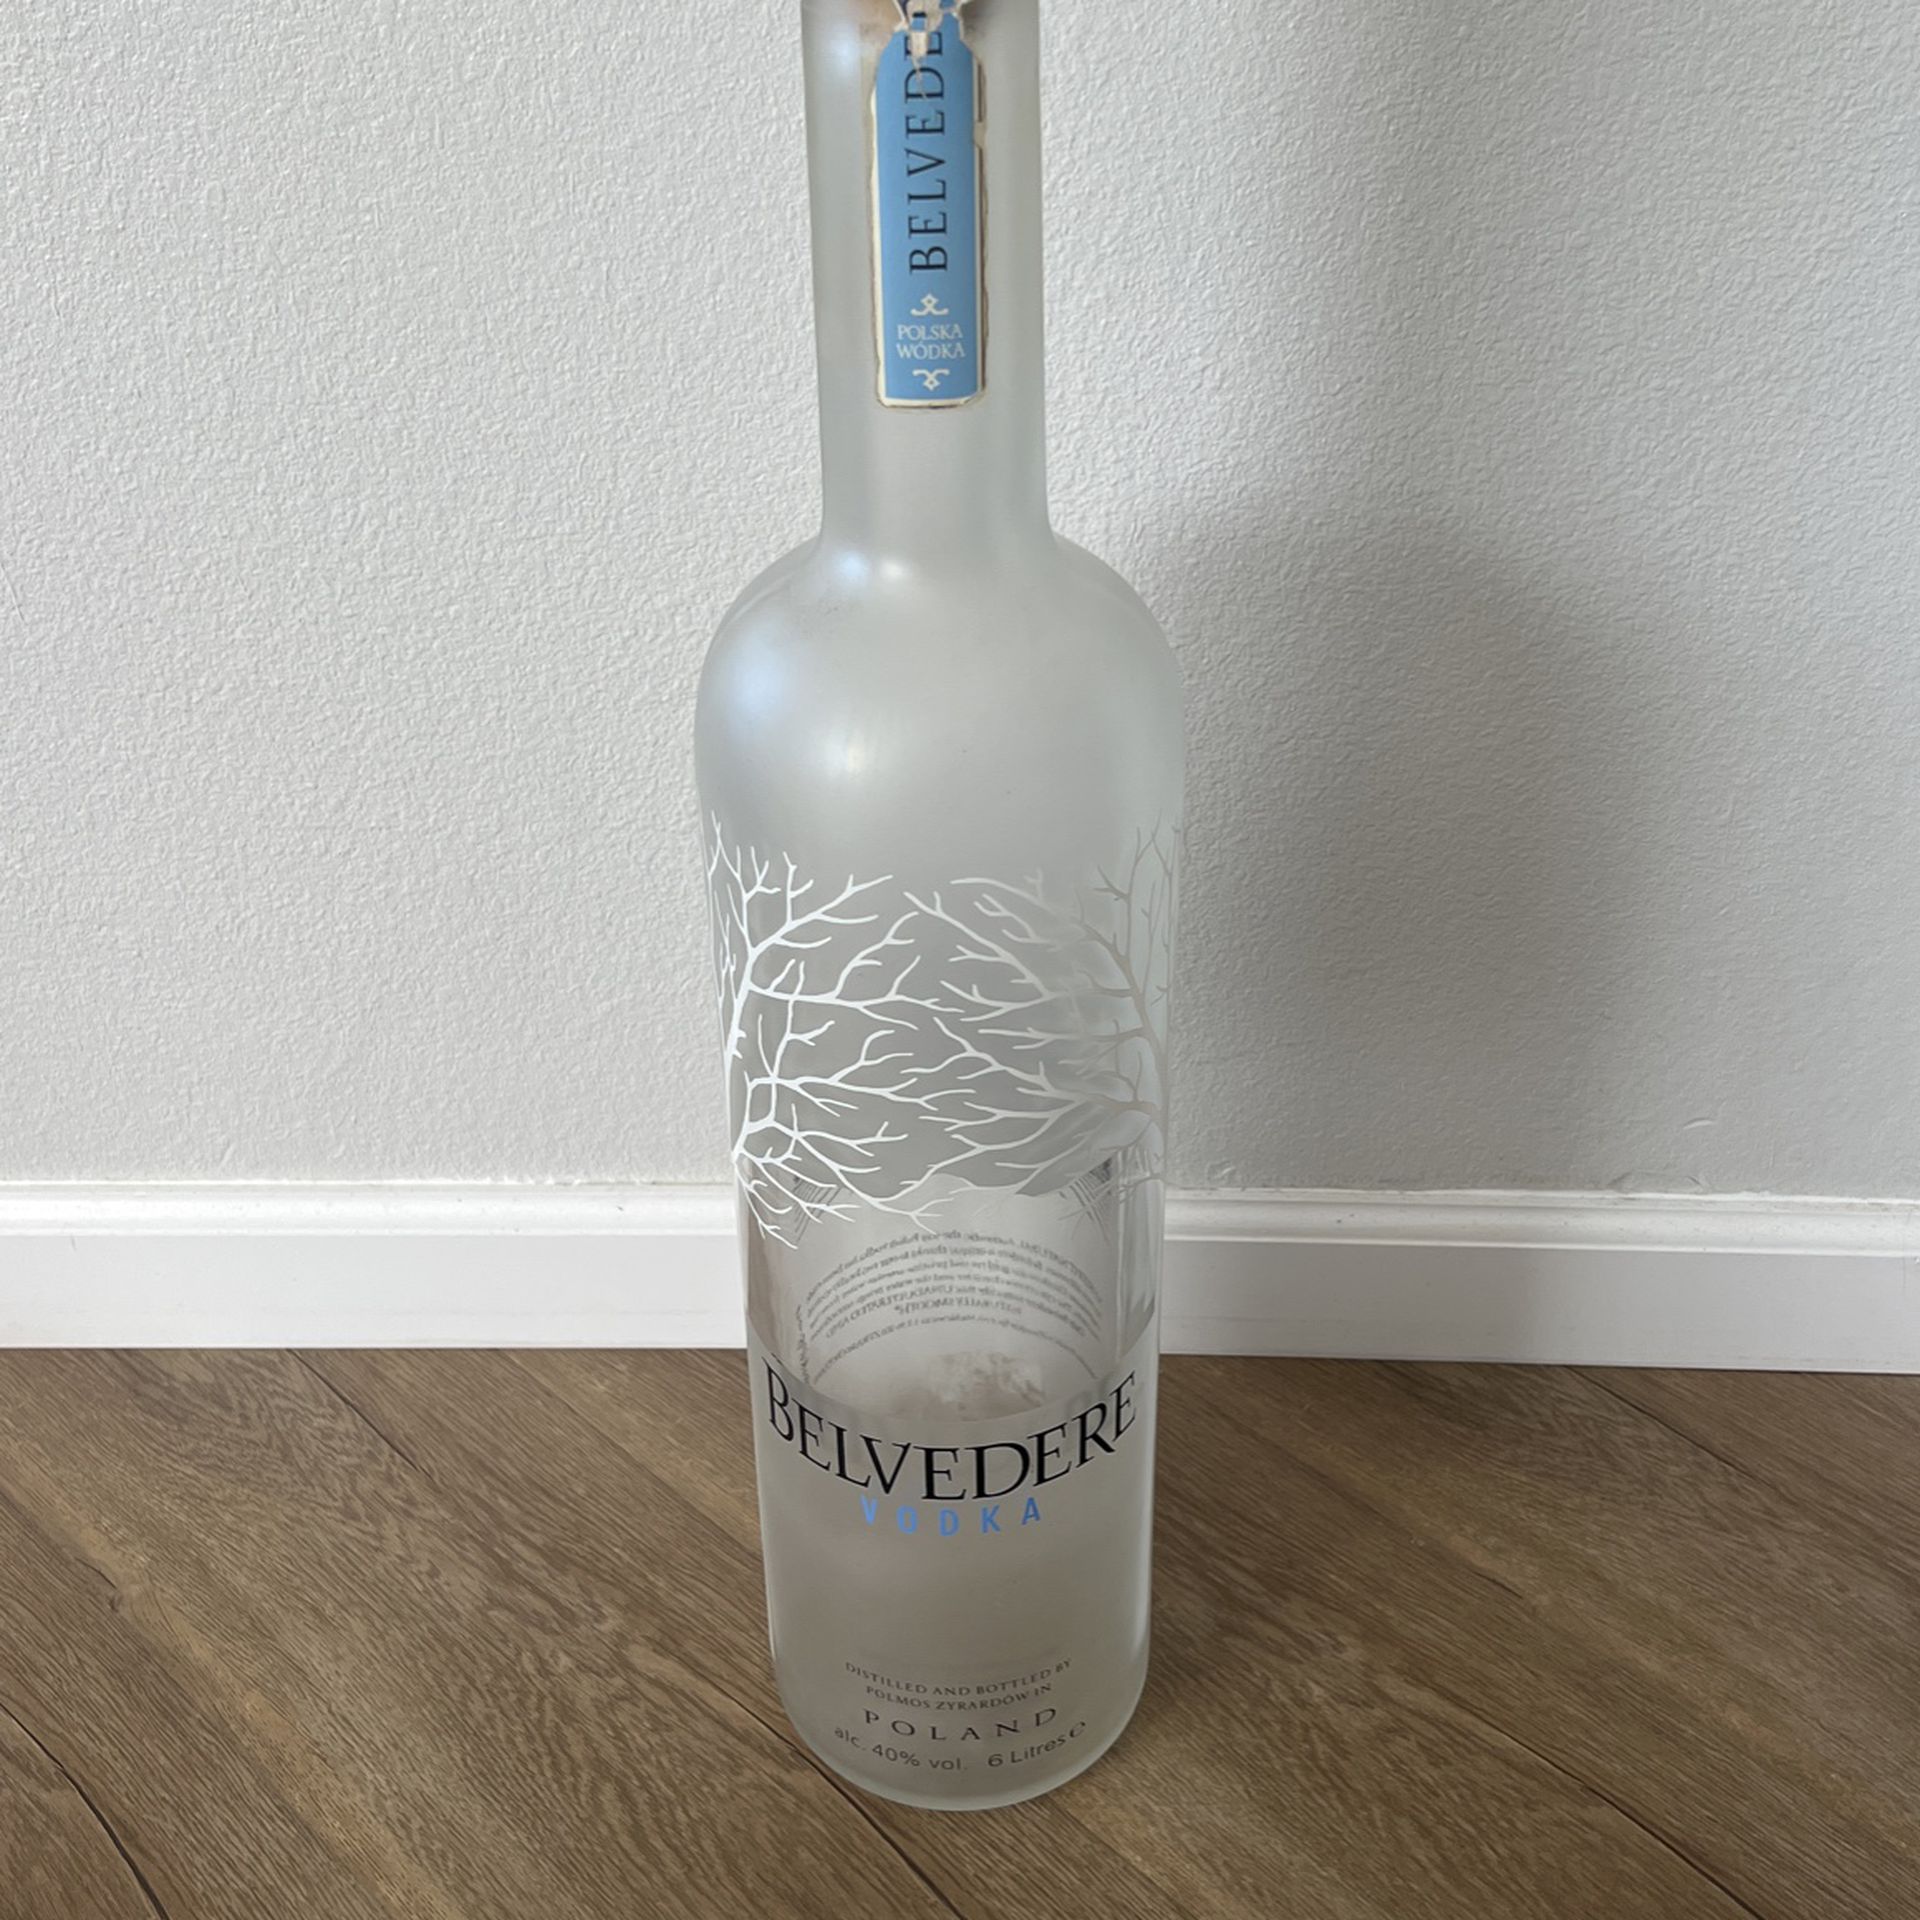 6L Magnum Bottle of Belvedere for Sale in Huntington Beach, CA - OfferUp